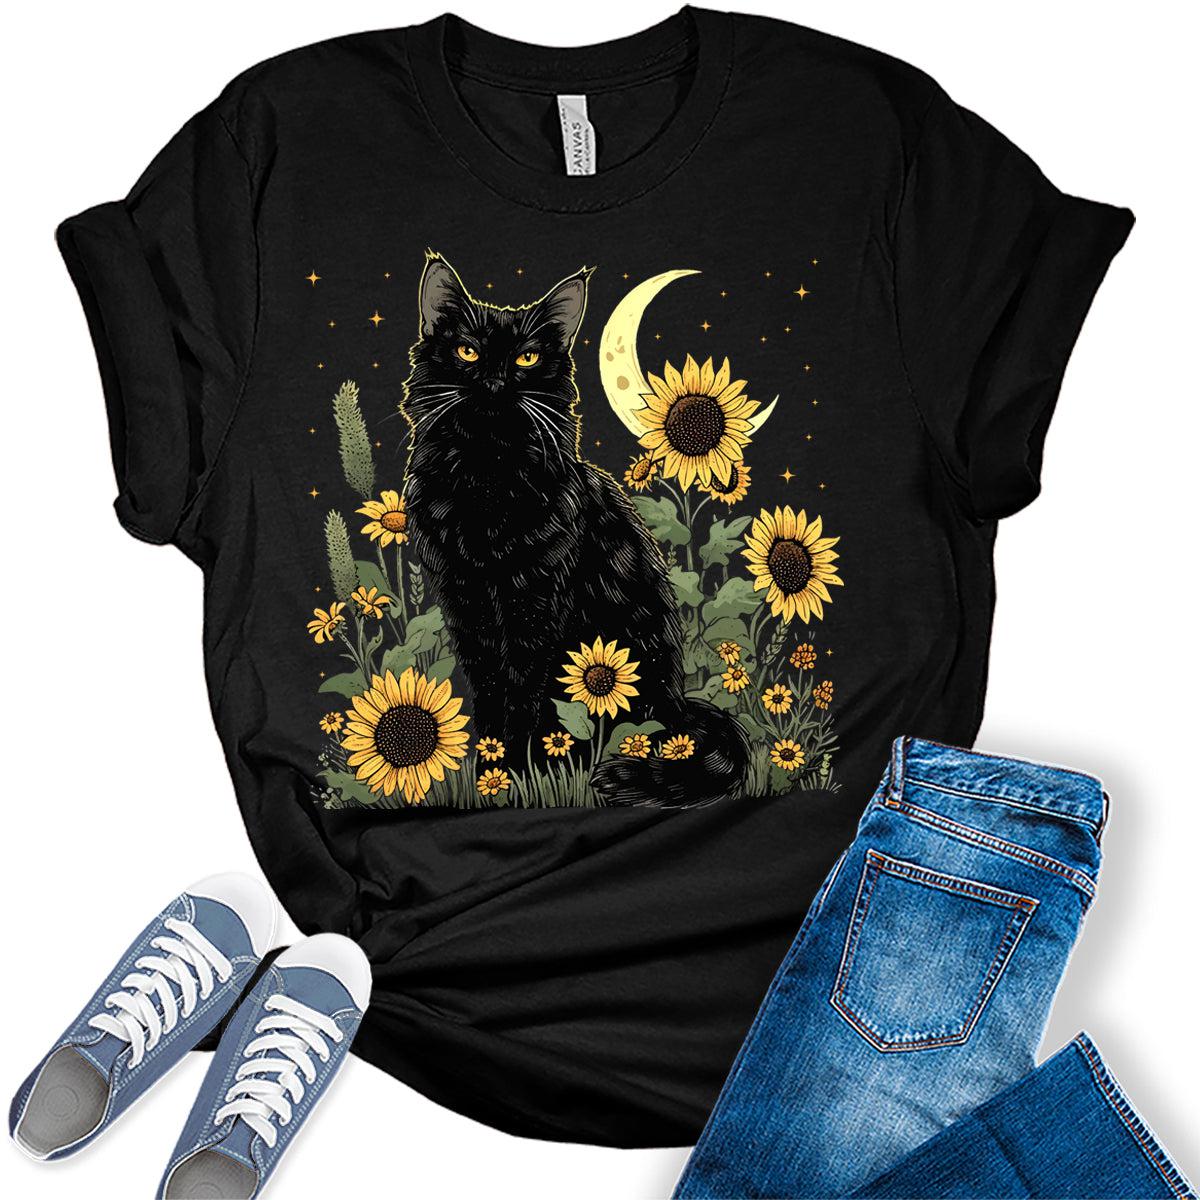 Cat Shirts Boho Sunflower Aesthetic Trendy Floral Summer Graphic Tees for Women